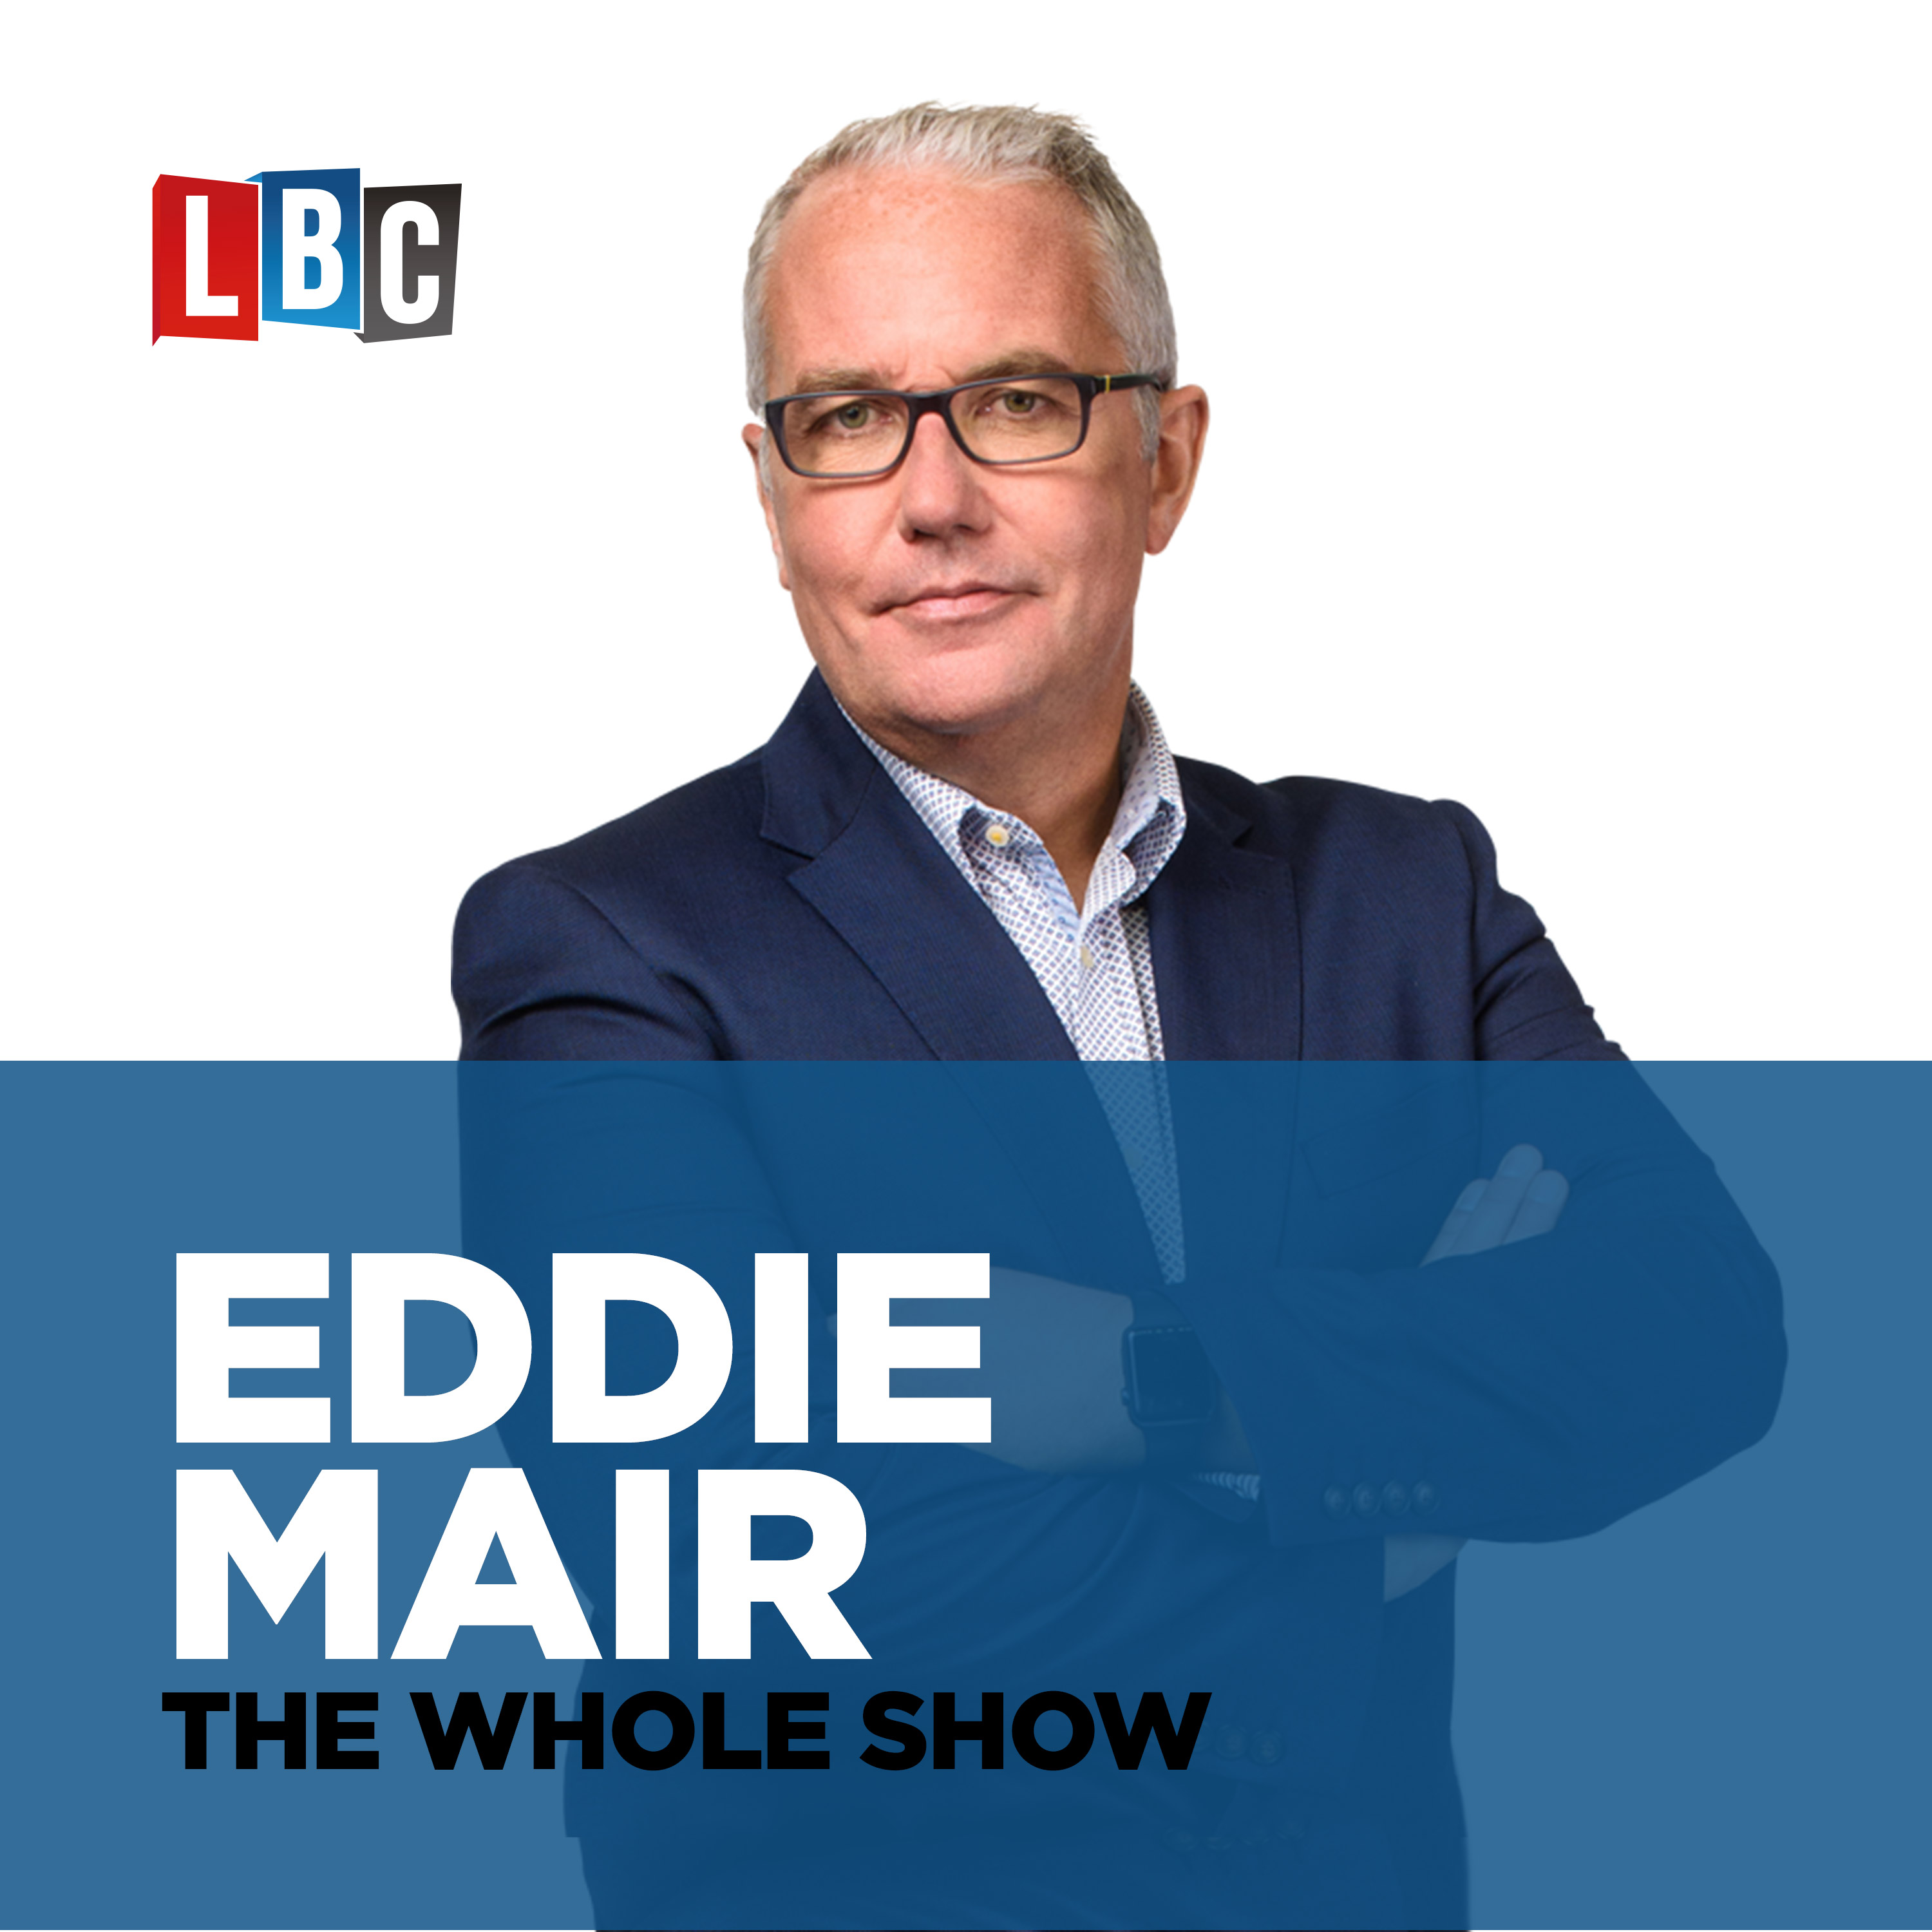 Eddie Mair - The Whole Show podcast show image